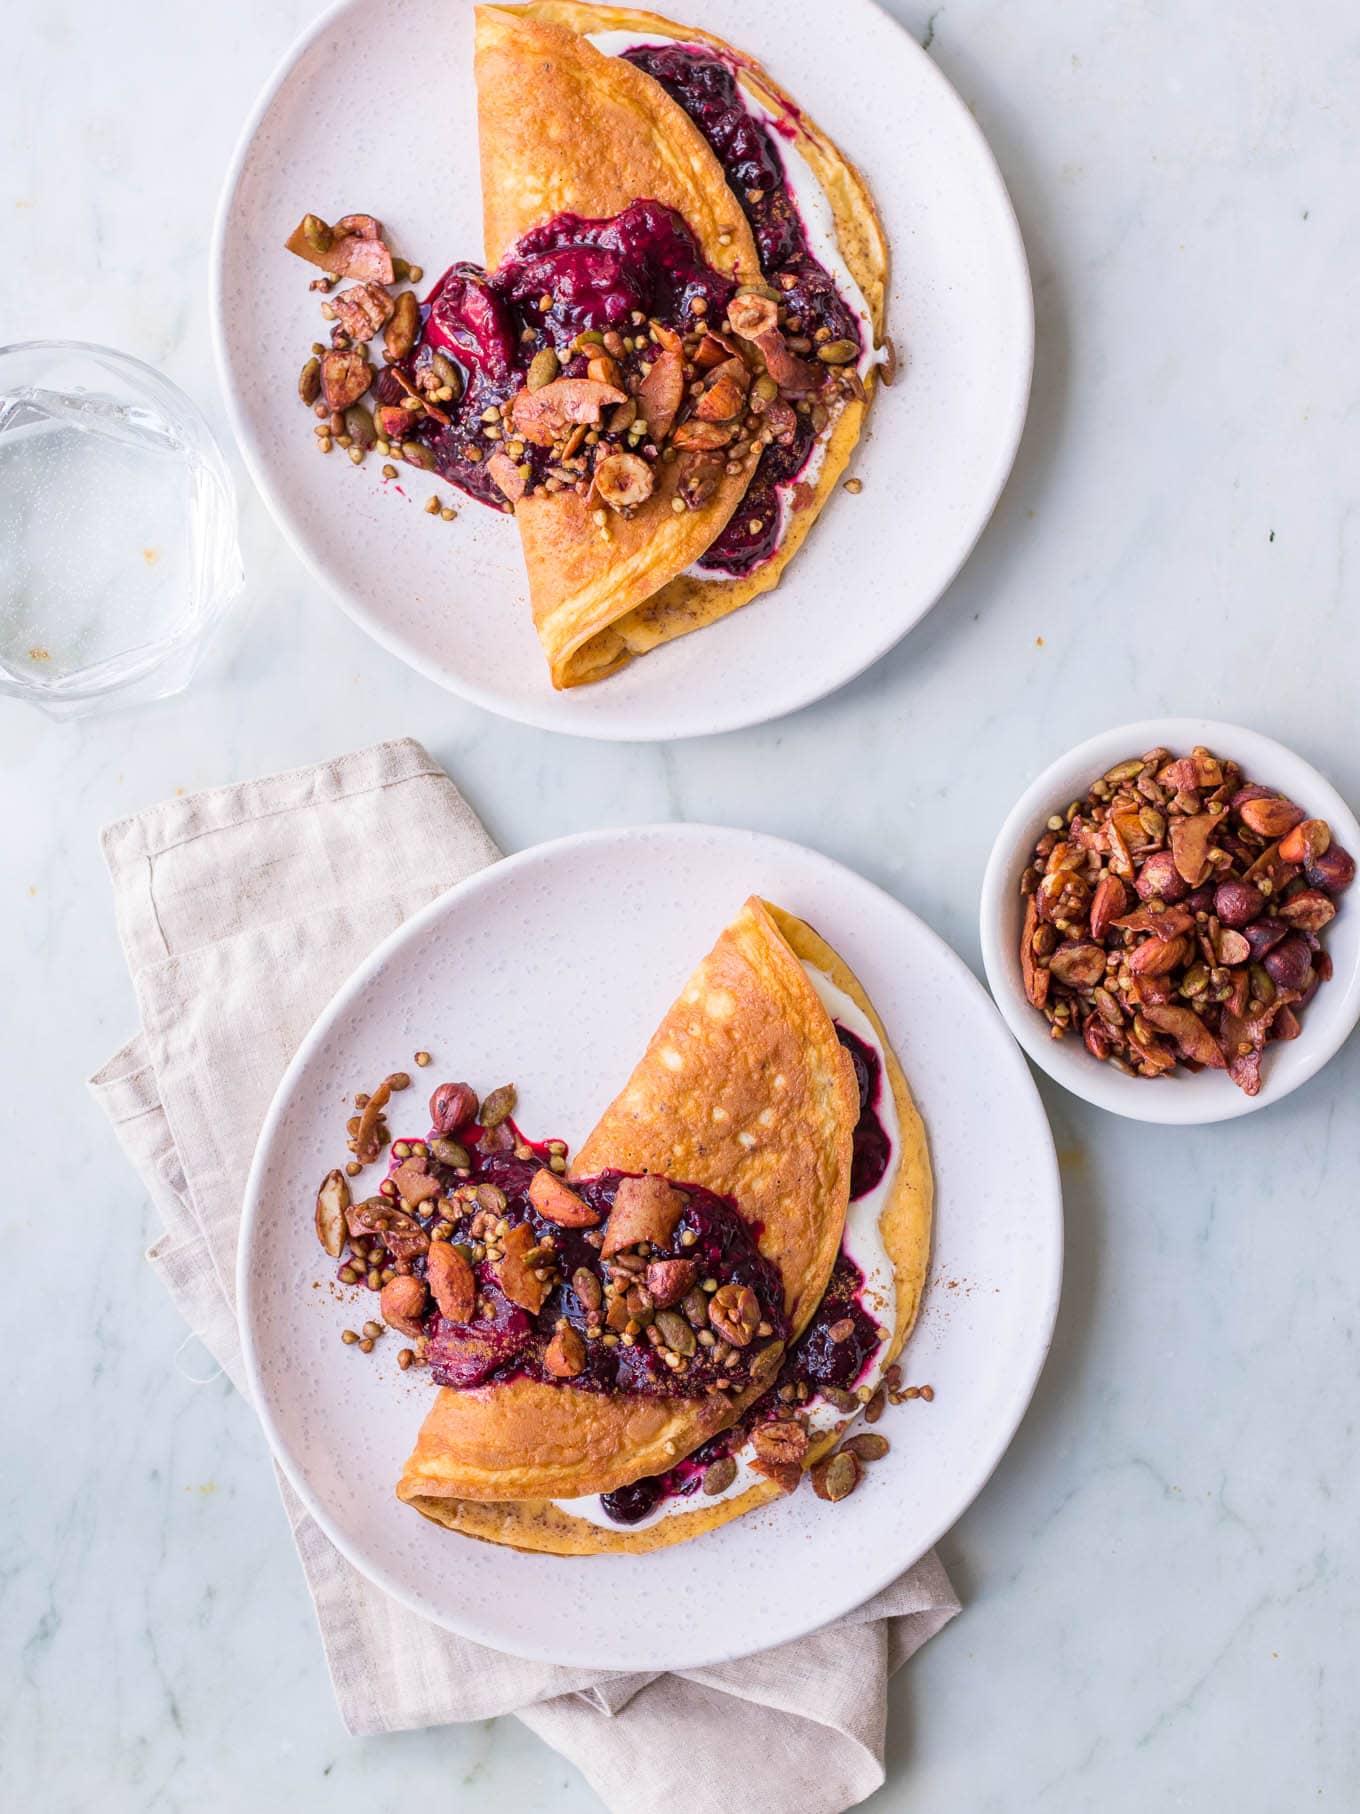 Sweet cinnamon omelettes with berry compote and granola topping